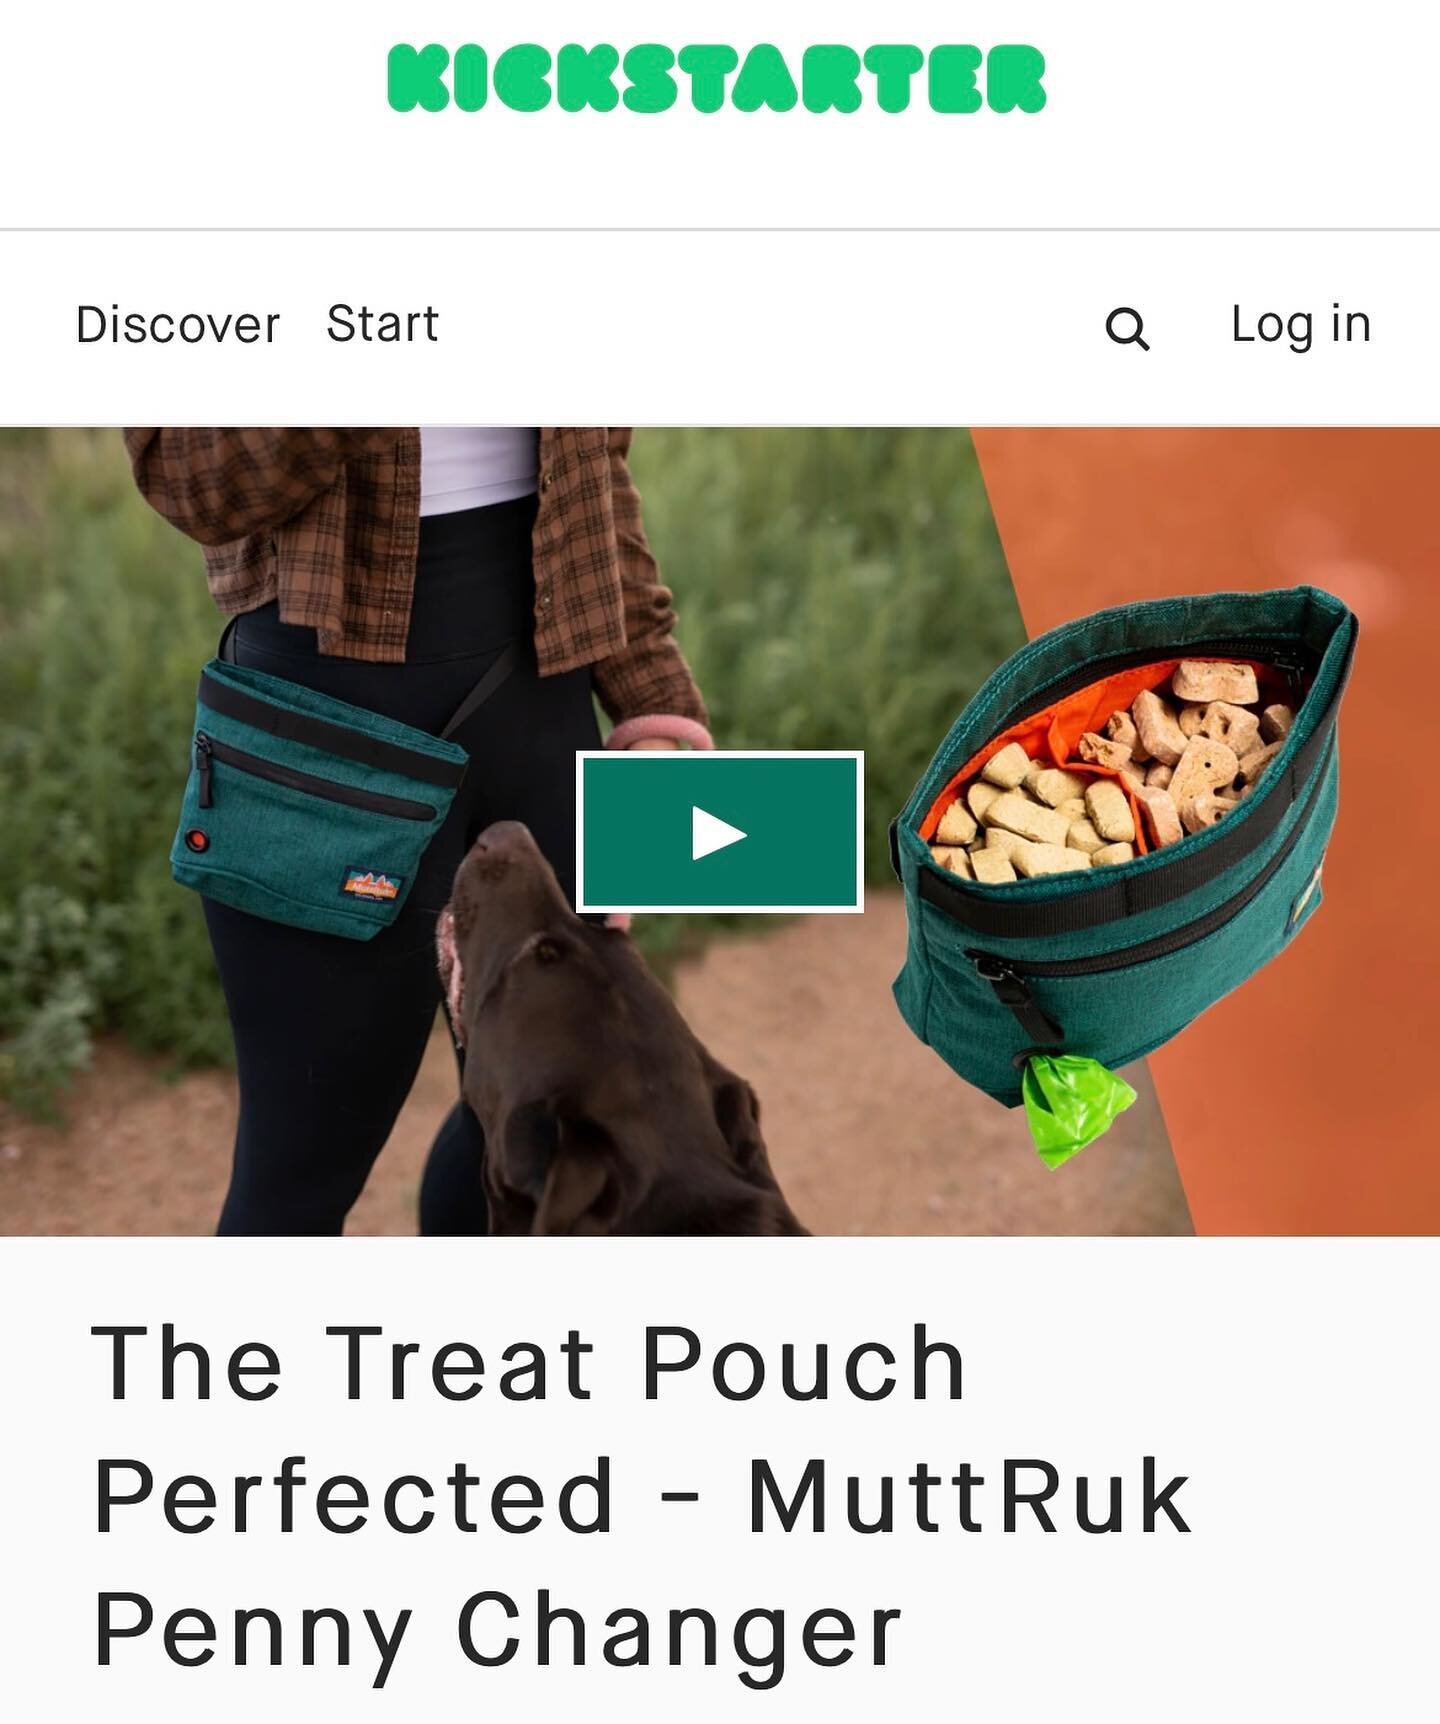 Muttruk&rsquo;s 3rd Kickstarter is live with their Penny Changer Treat Pouch 🐕. Congrats to the entire team on another successful launch! Fully funded in hours!